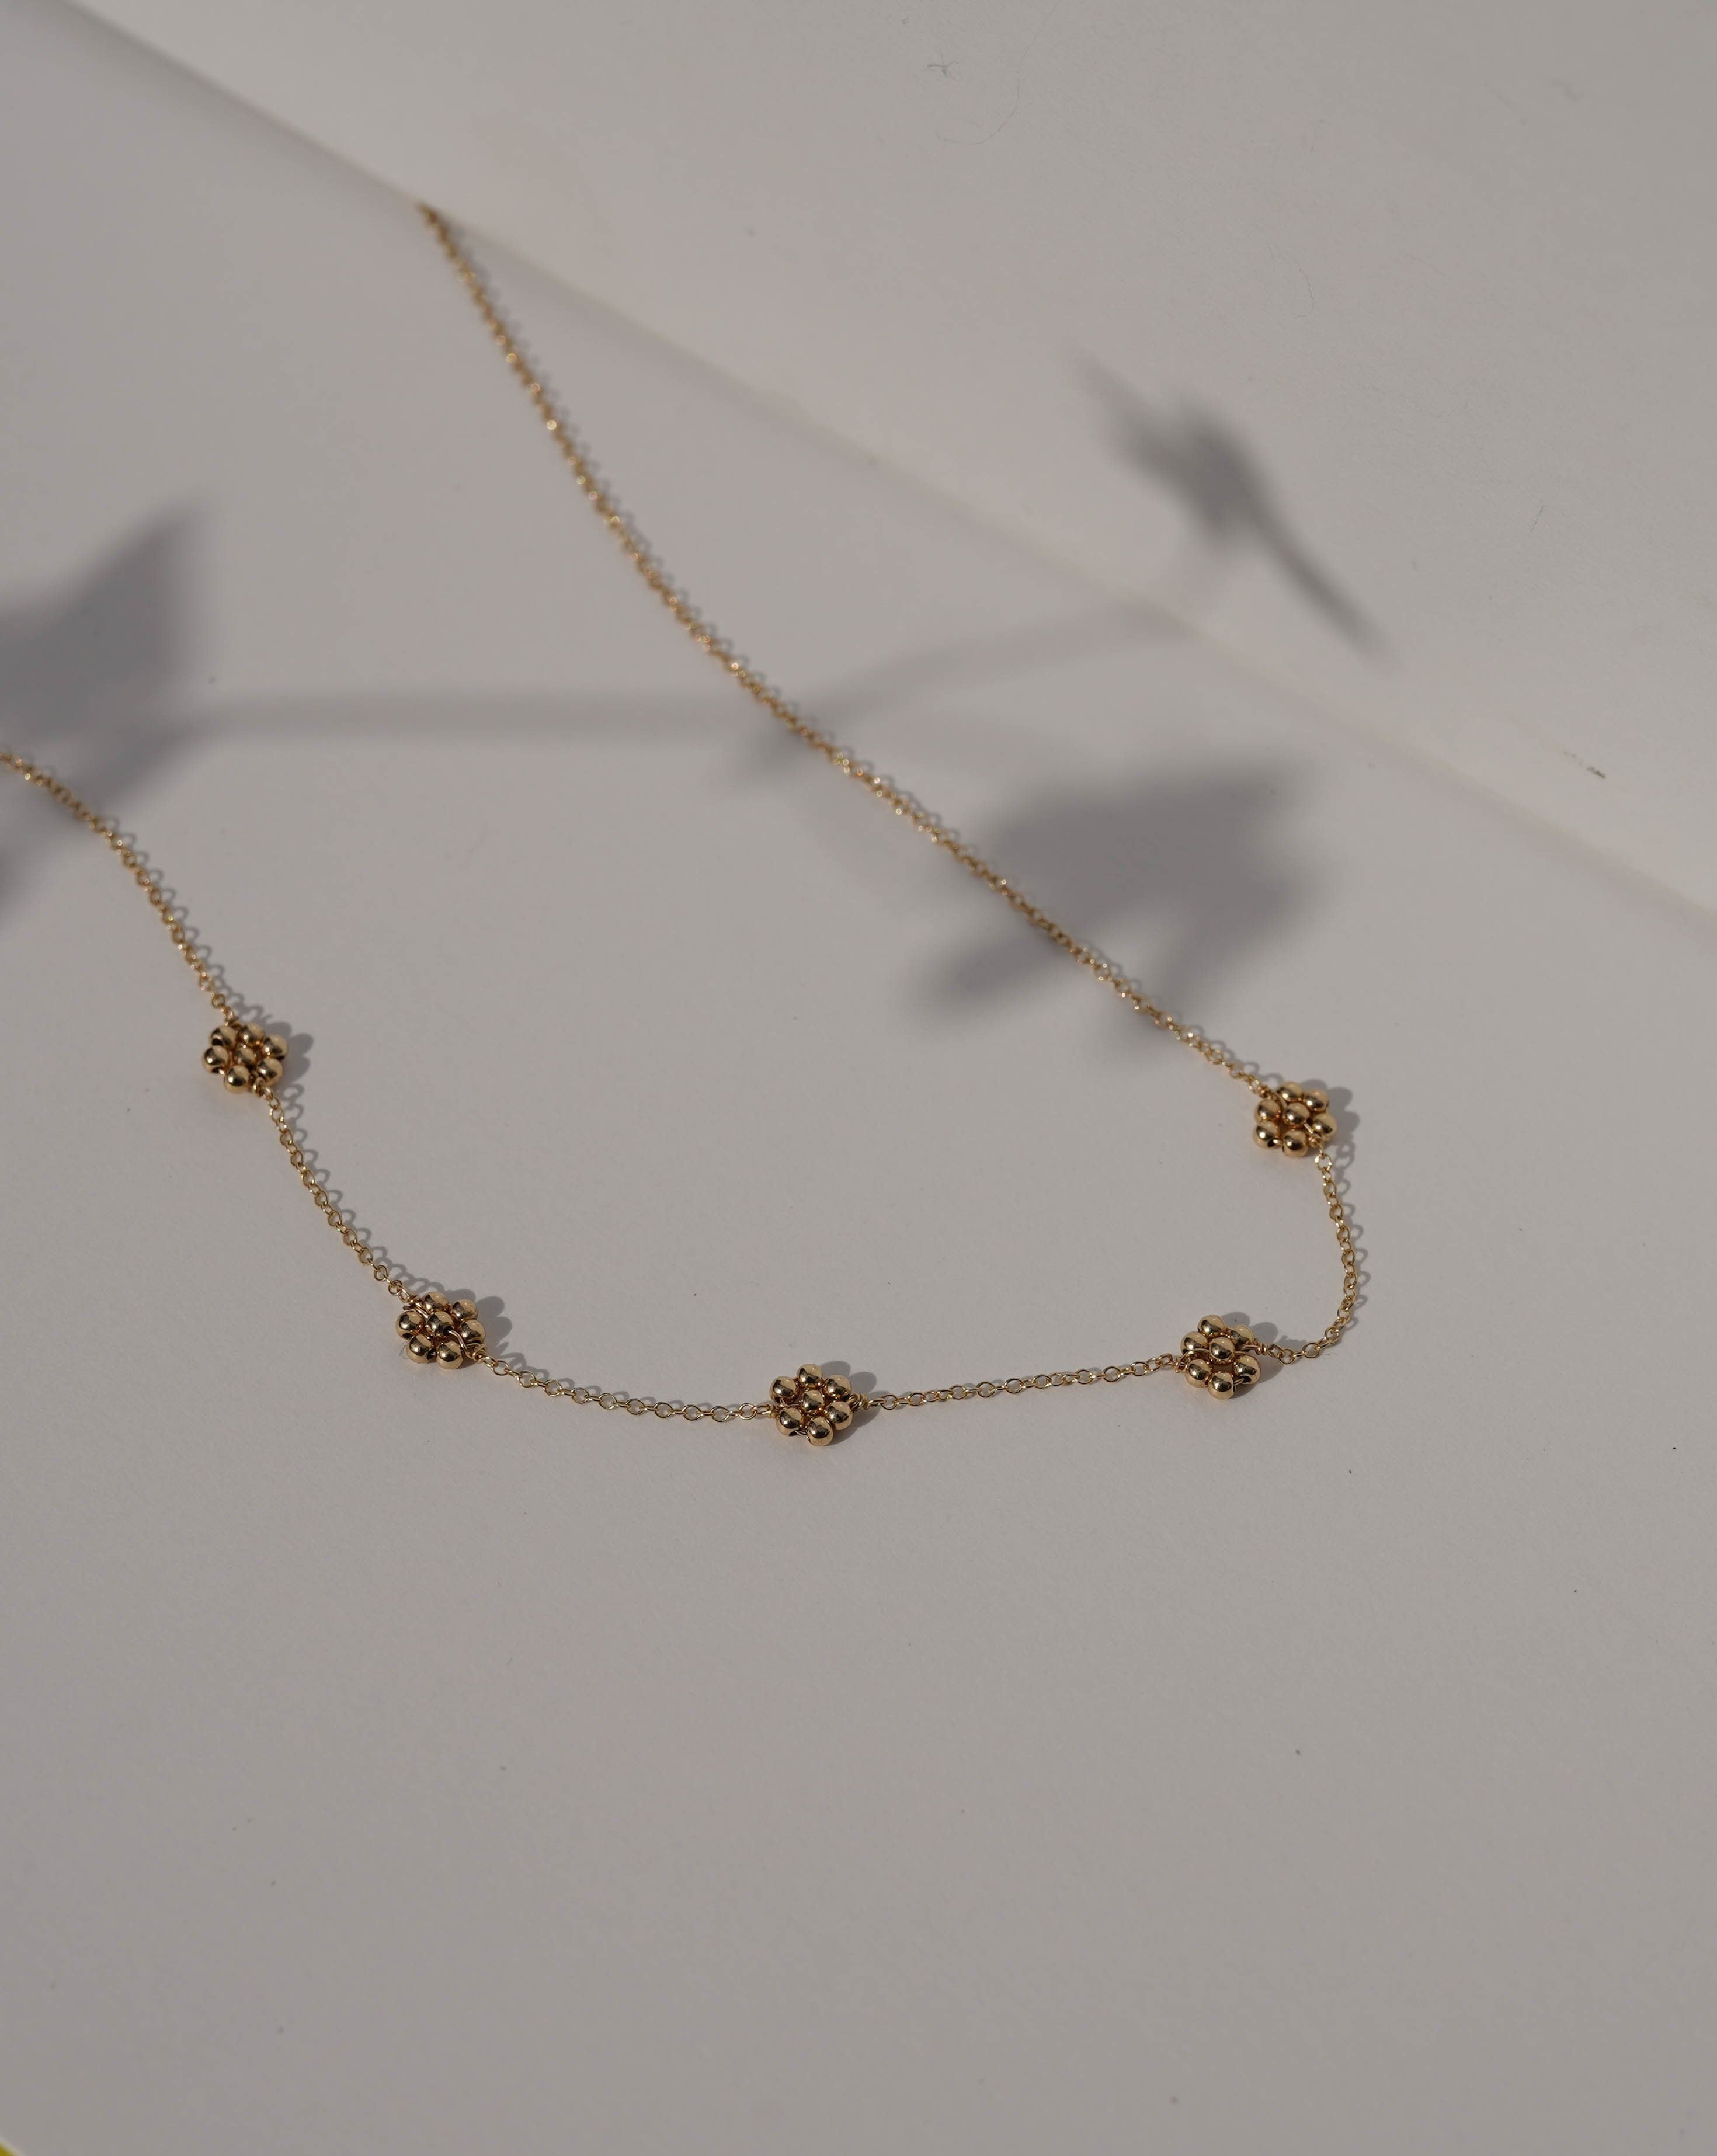 Florencia Necklace by KOZAKH. A 16 to 18 inch adjustable length necklace in 14K Gold Filled, featuring handmade gold beaded daisies.